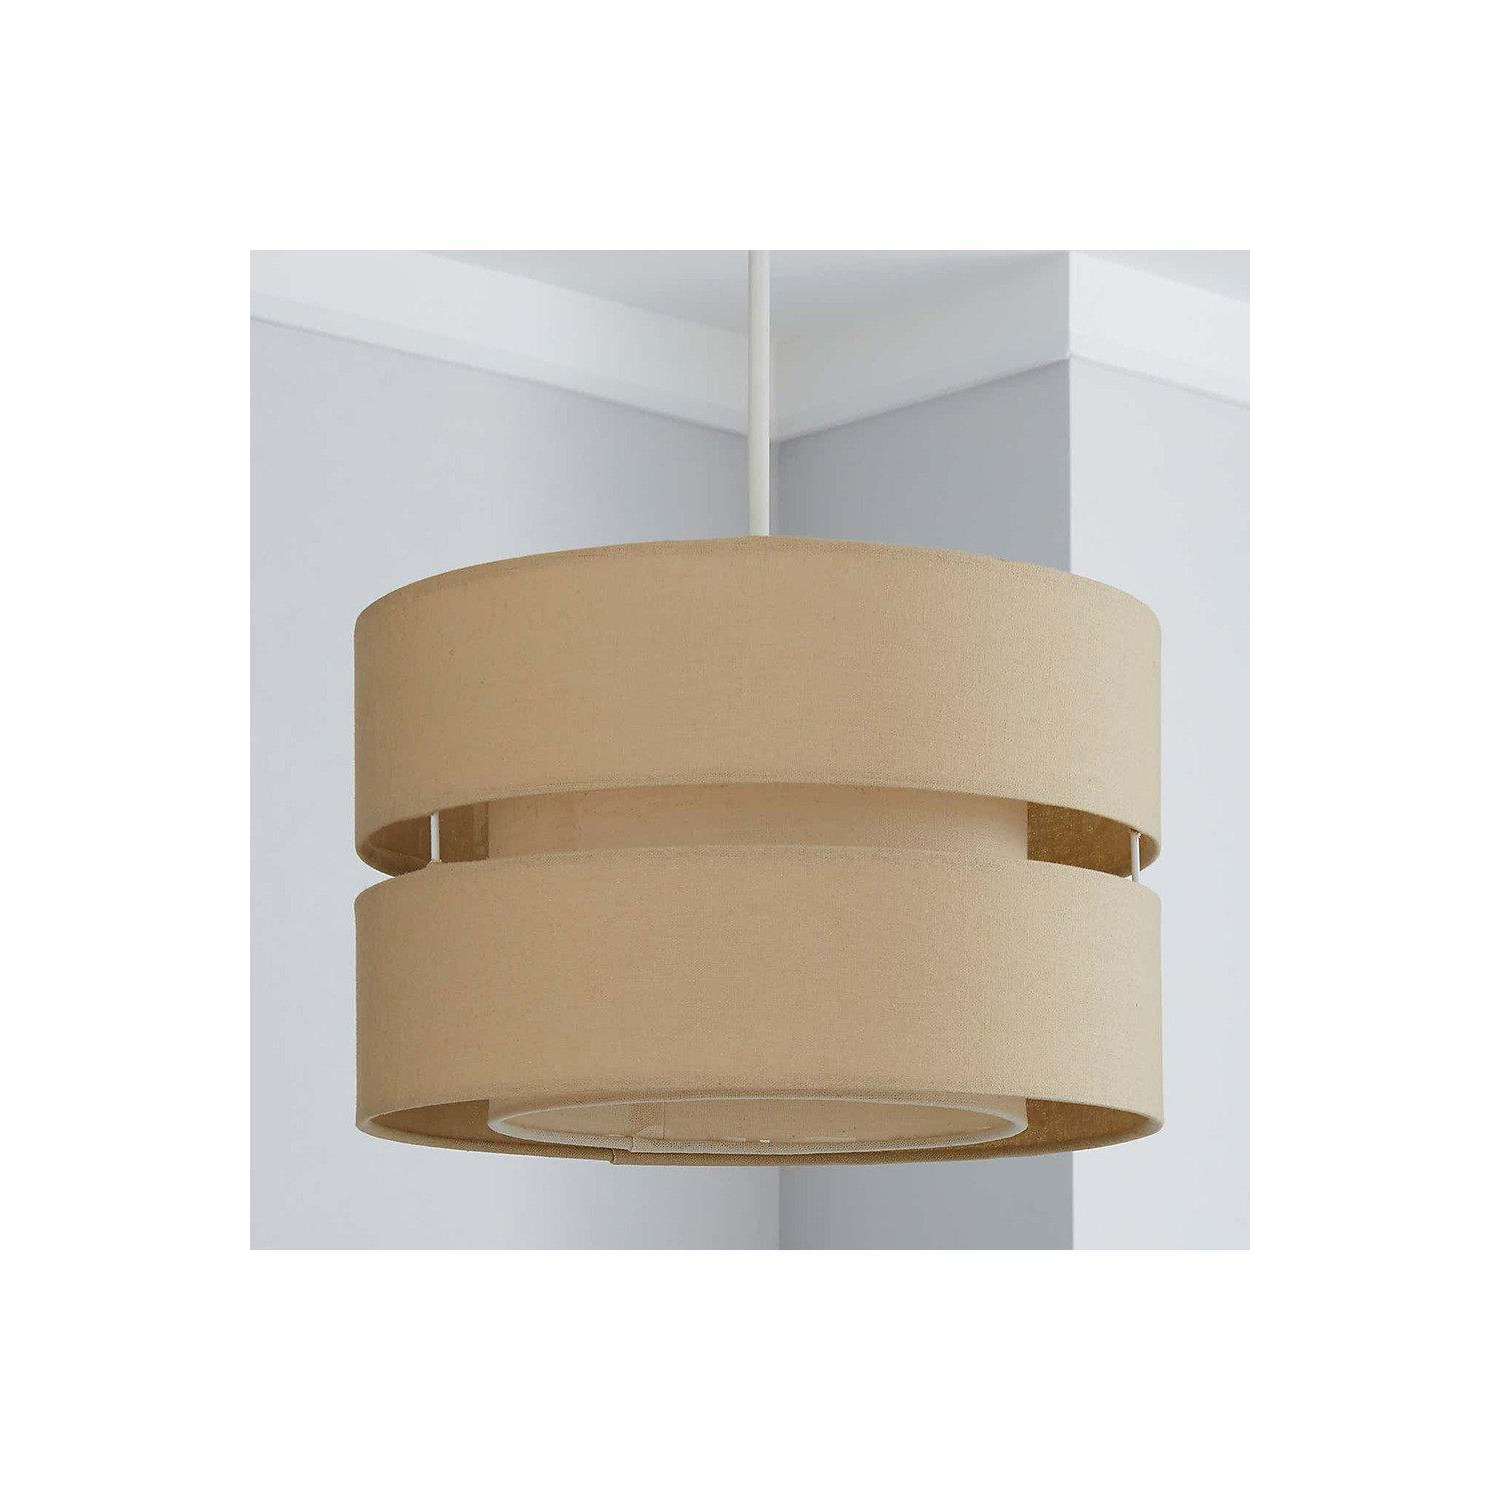 'Gayle' Cream Two Tier Ceiling Shade - image 1